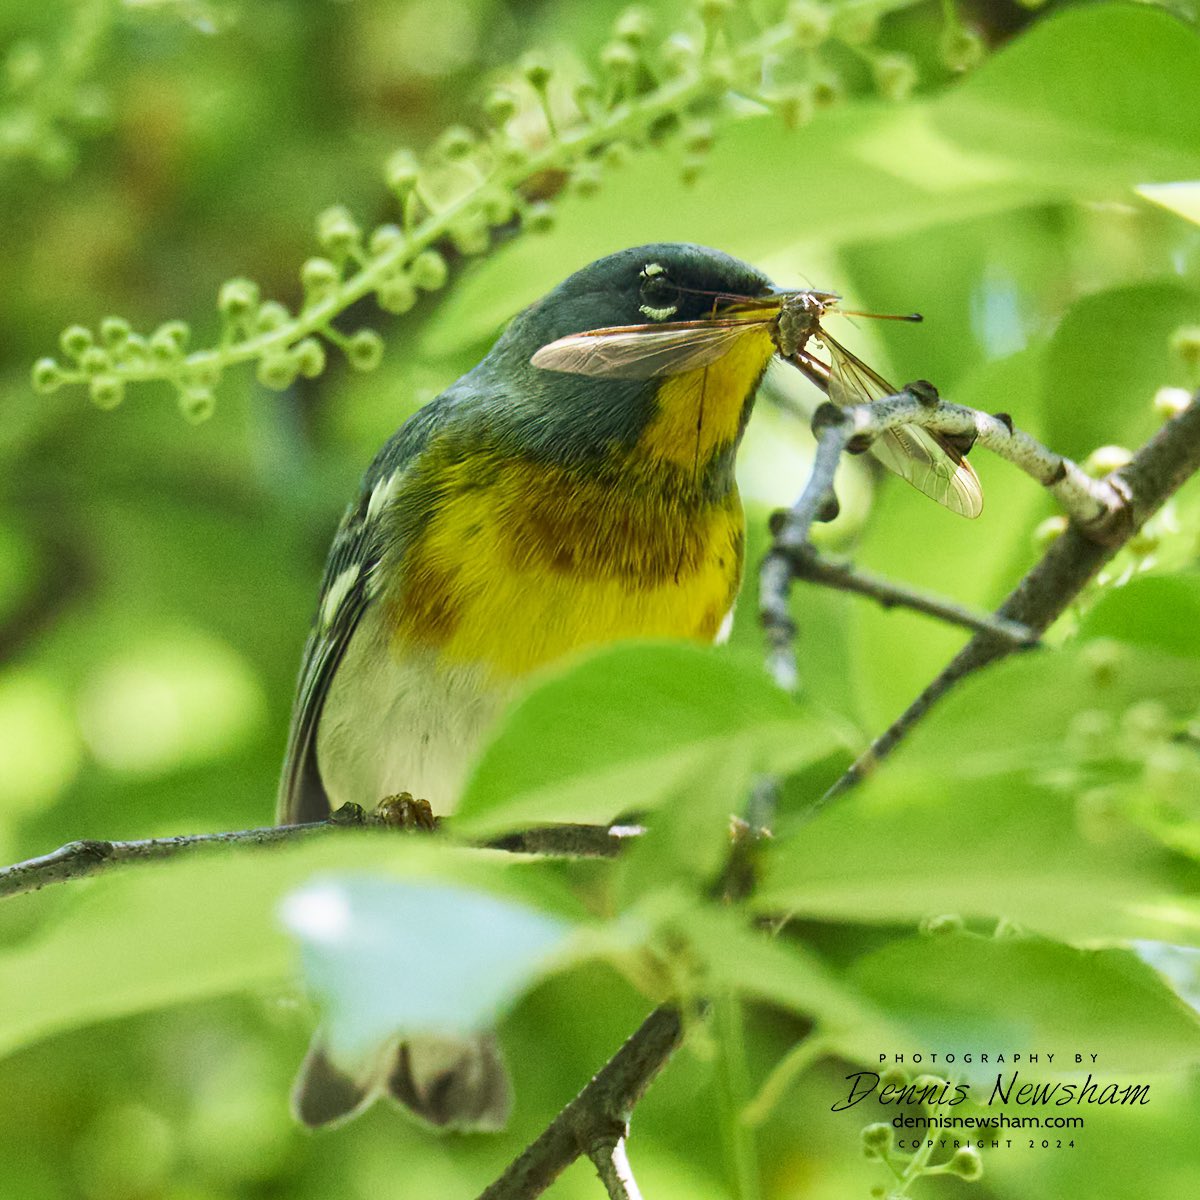 A Northern Parula having a feast today by the balancing rock in #CentralPark today! DennisNewsham.com Newly designed website a resource for wildlife themed gifts. #birding #warblers #nyc#springmigration2024 #gifts #birdcpp